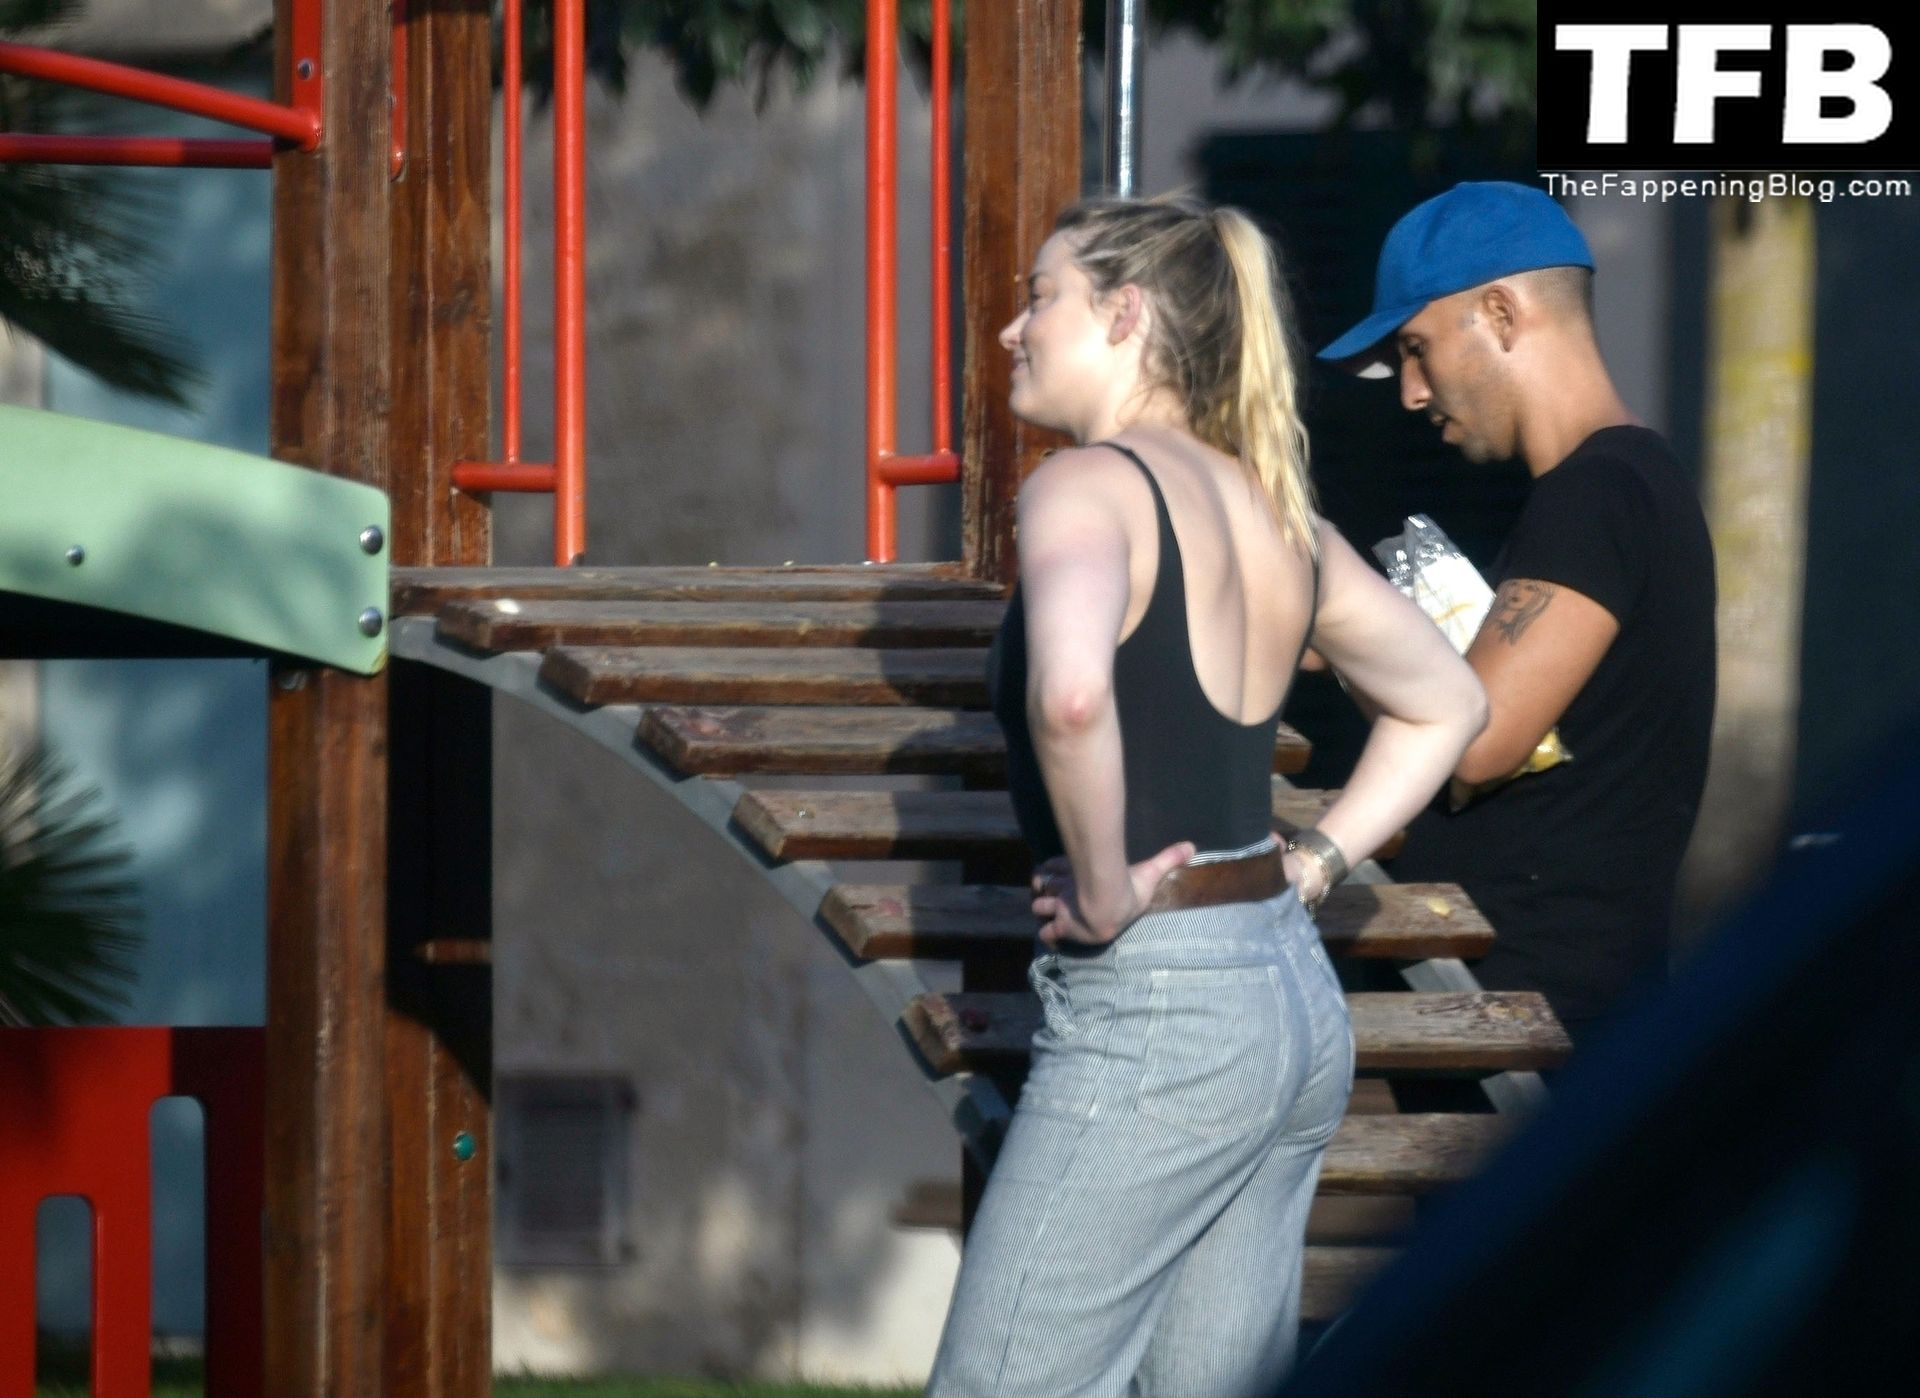 Amber Heard Sexy The Fappening Blog 2 - Amber Heard Continues to Get Away From It All During her Spanish Vacation in Palma De Mallorca (26 Photos)